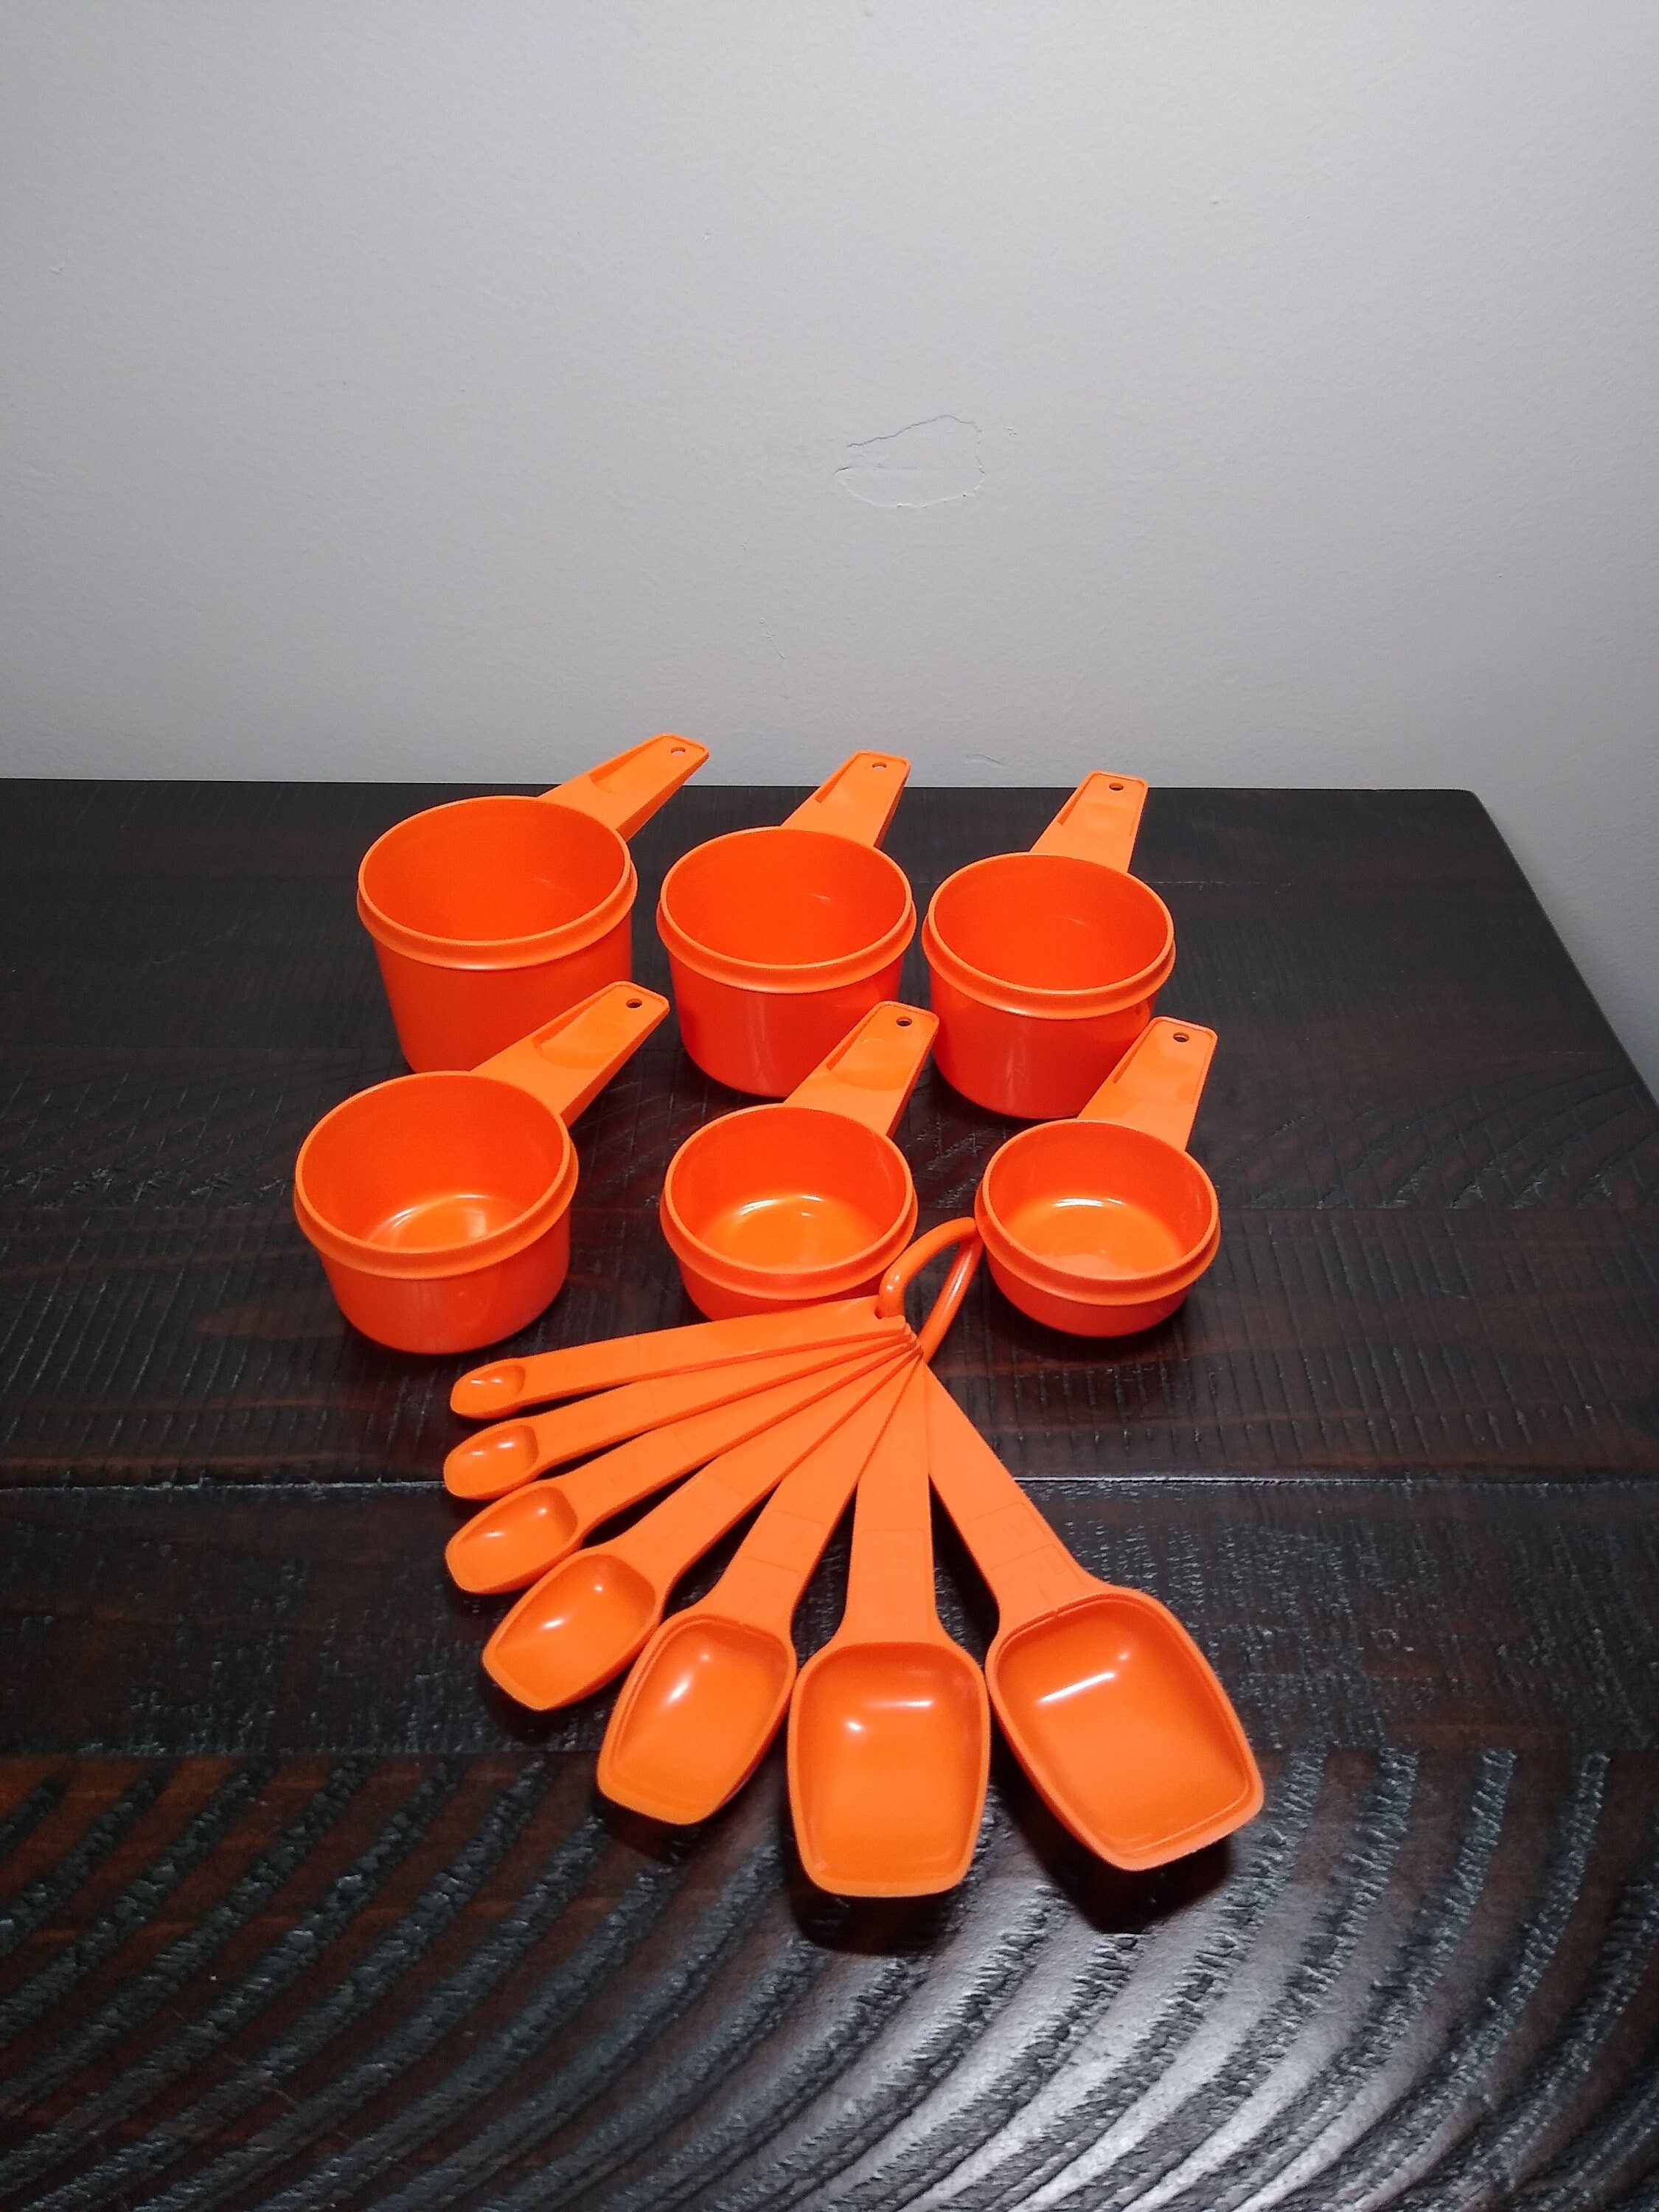 Vintage TUPPERWARE Replacement Dry Measuring Cups You Chose All Colors Size